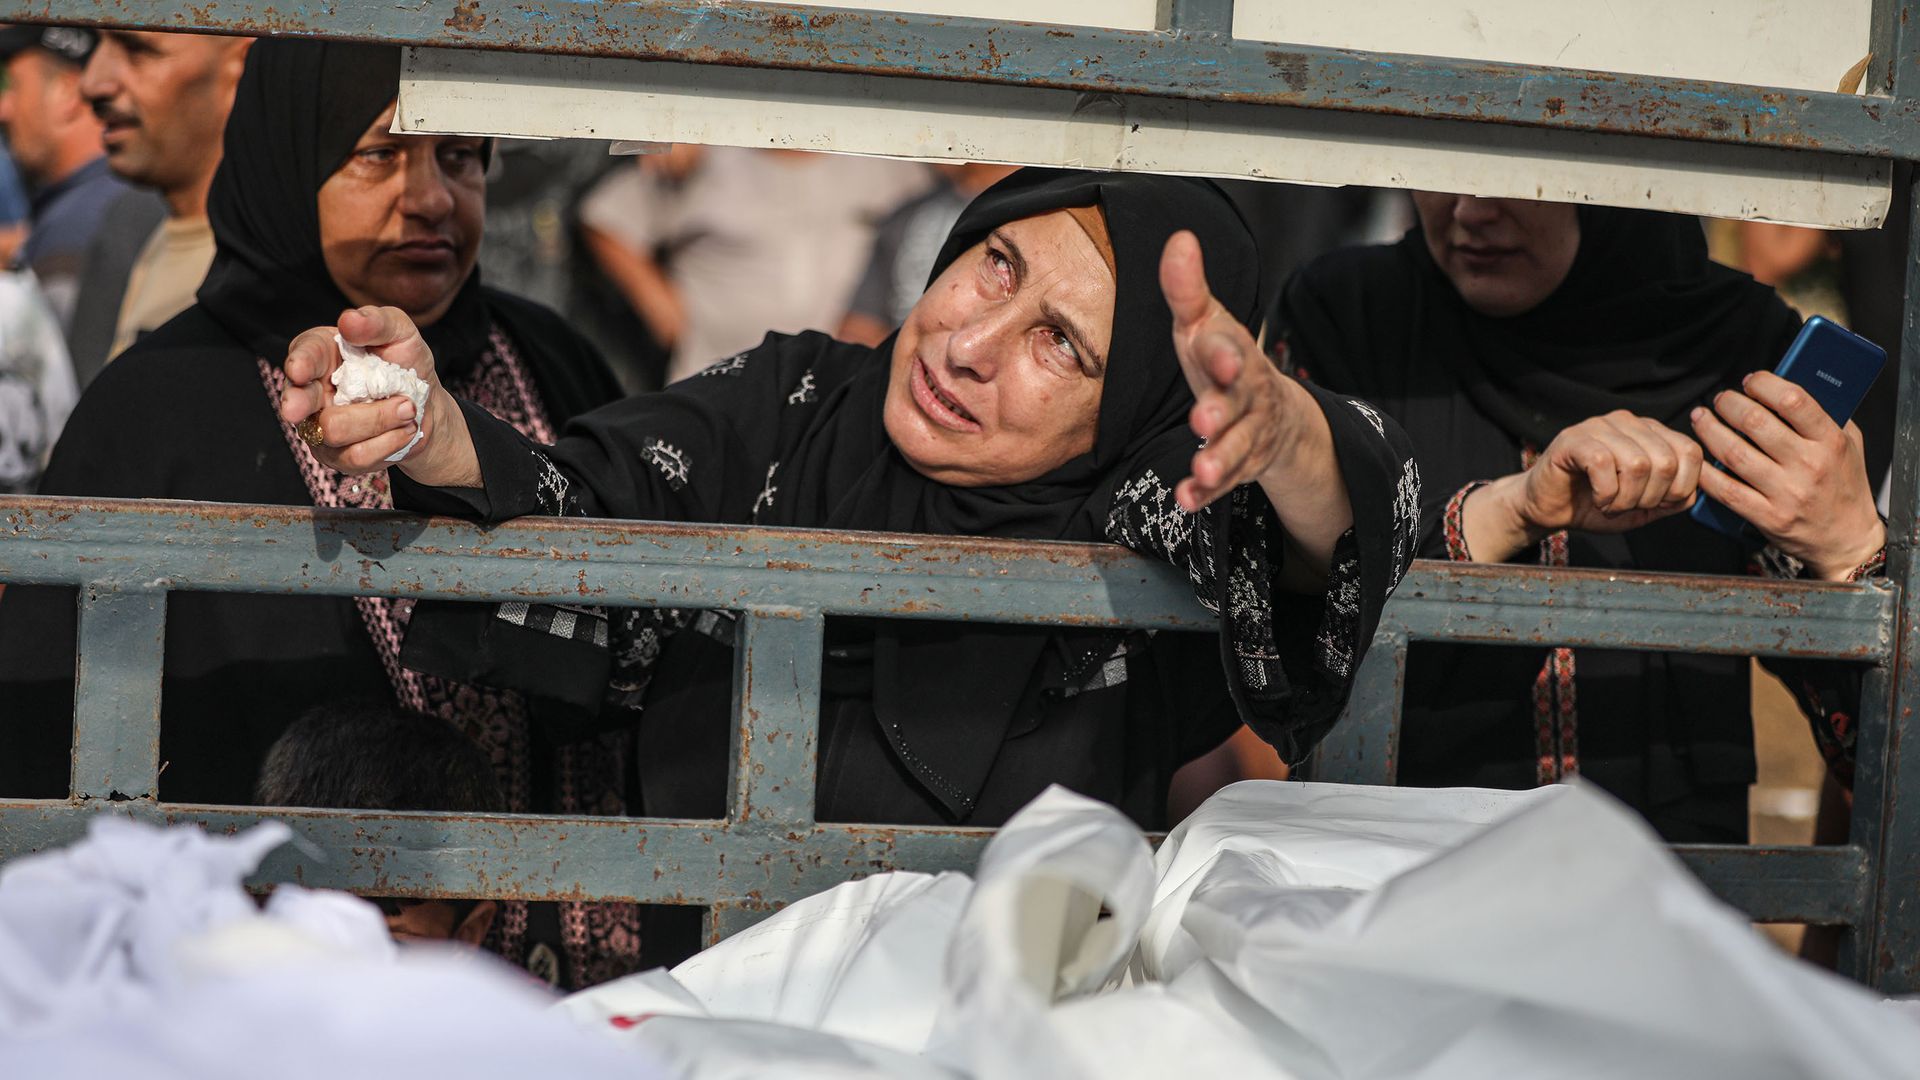 People mourn at the morgue of Nasser Hospital in Khan Yunis, Gaza. Photo: Mustafa Hassona/Anadolu via Getty Images